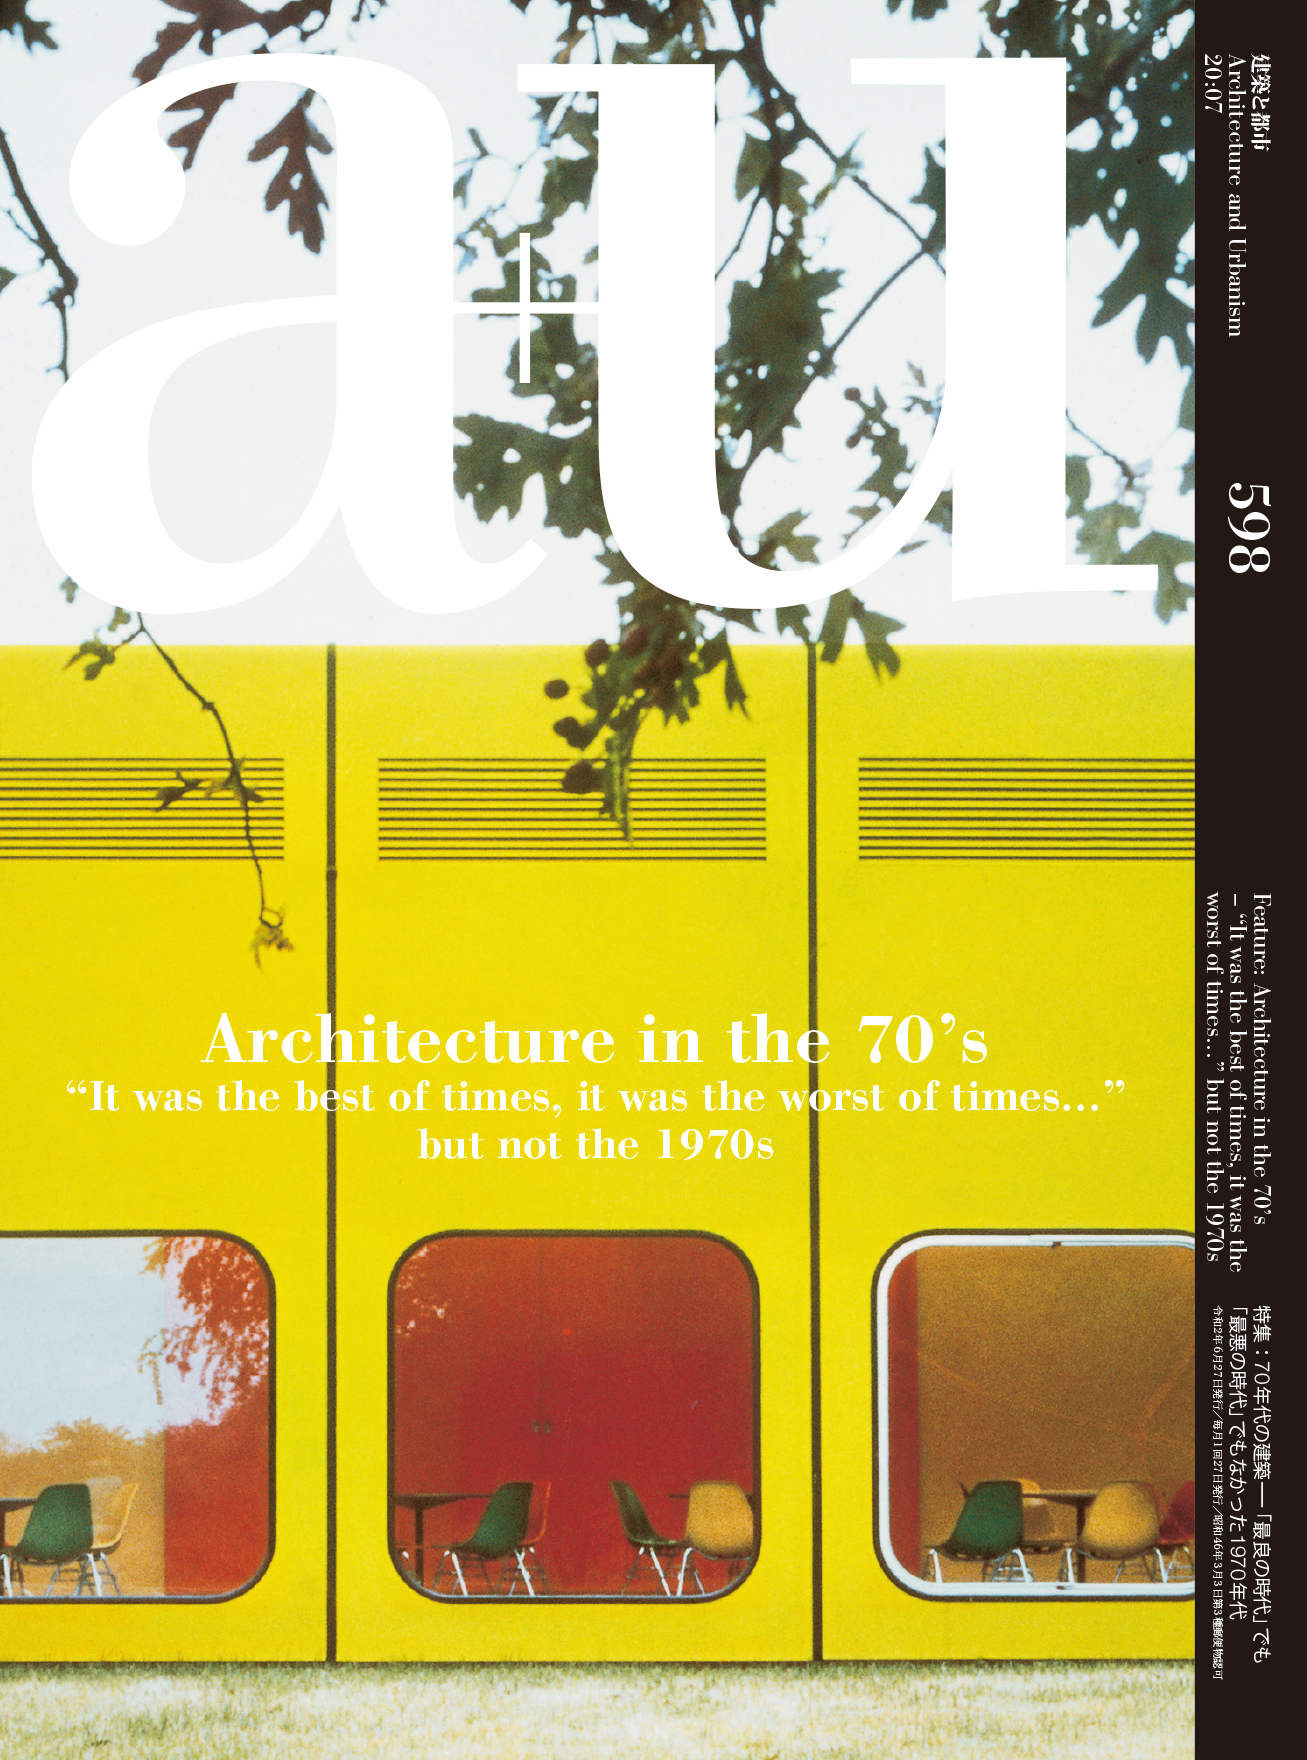 a+u 2020:07 – Feature: Architecture in the 70's “It was the best of times,  it was the worst of times…” but not the 1970s, Architecture and Urbanism (a+u)